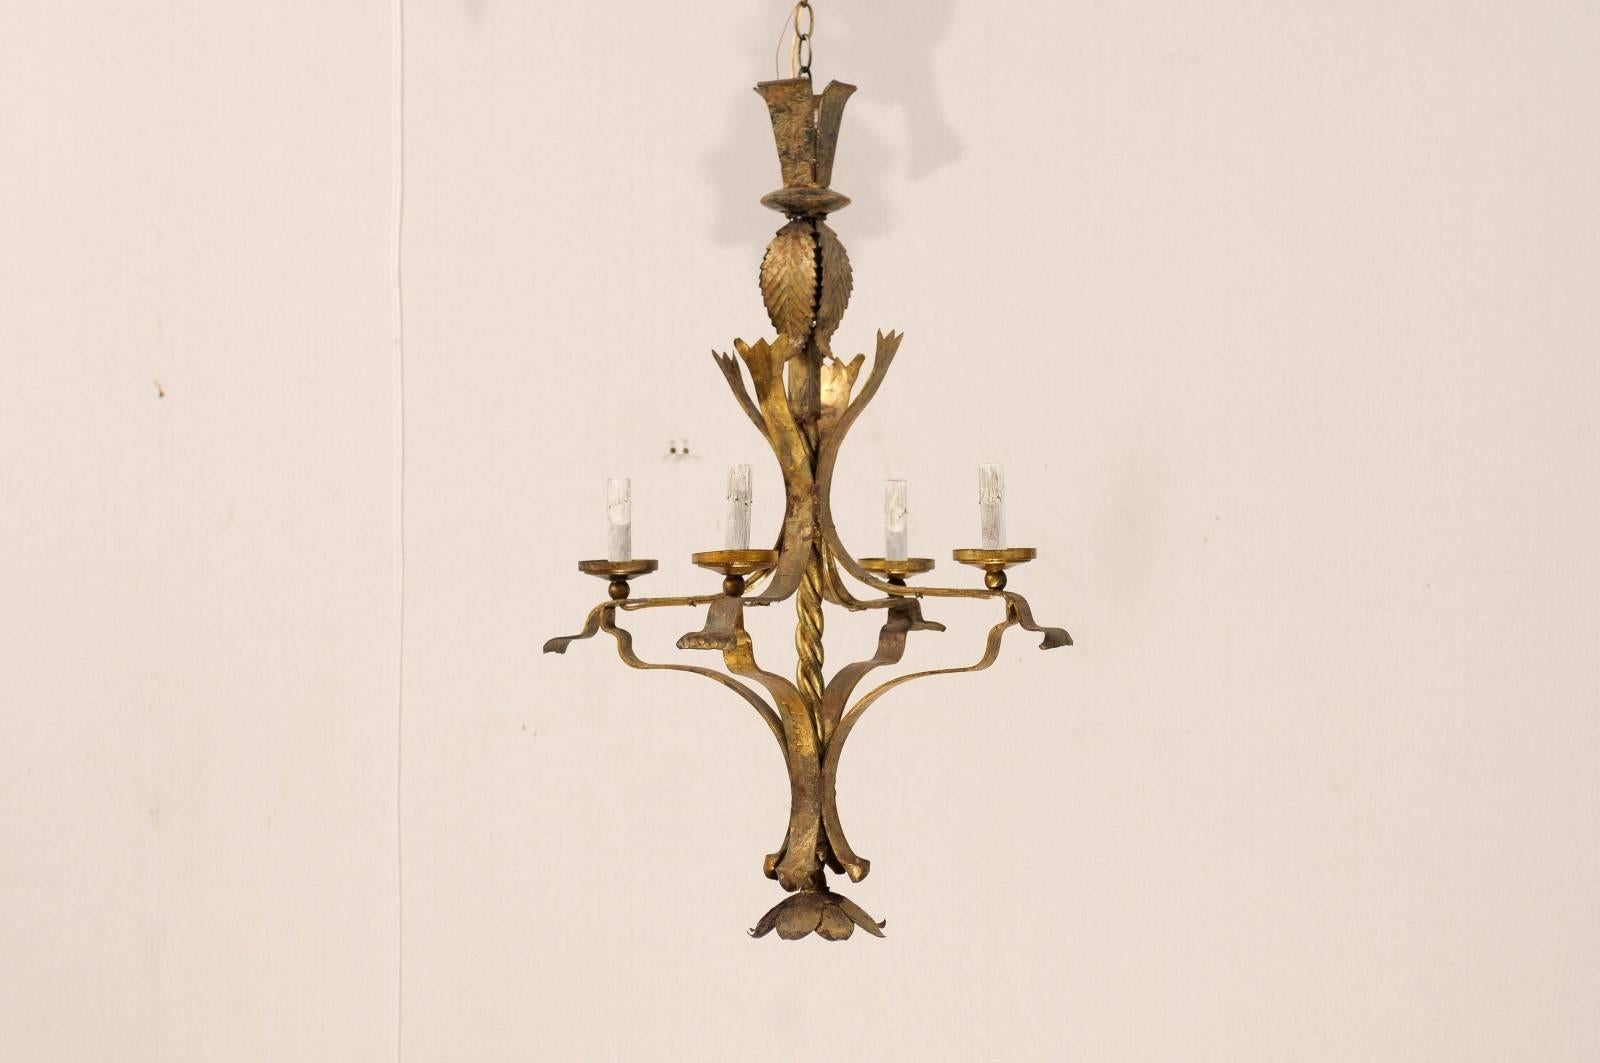 A French vintage four-light chandelier. This French chandelier from the mid-20th century is made of gilt iron. The twisted central column connects leaf motifs at the top to a floral motif finial at the bottom. This chandelier is a nicely aged gold